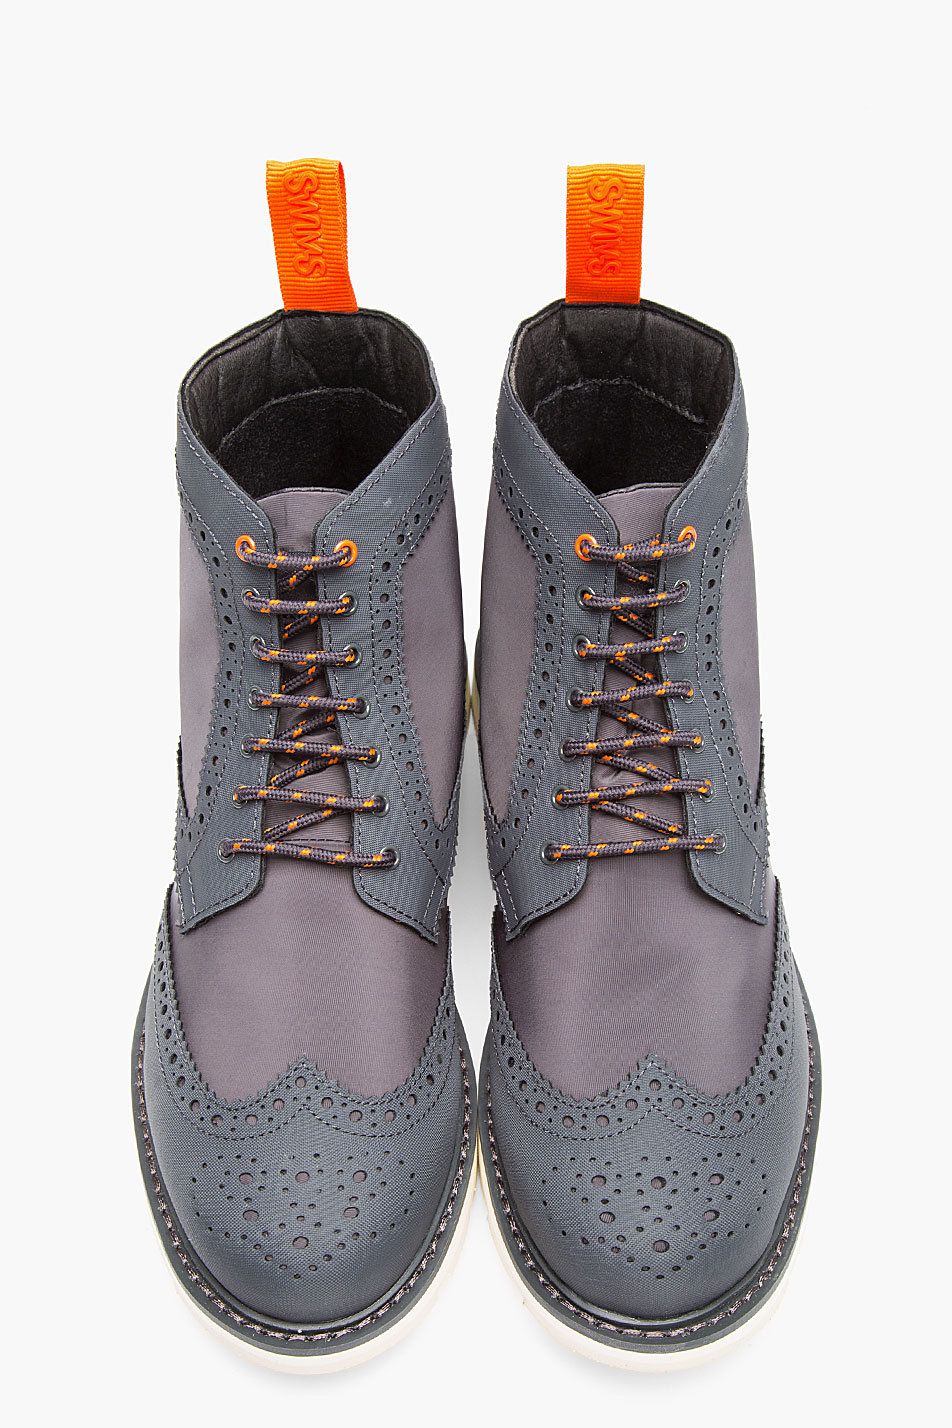 Swims Grey Charles 2 Wingtip Brogue Boots in Gray for Men - Lyst